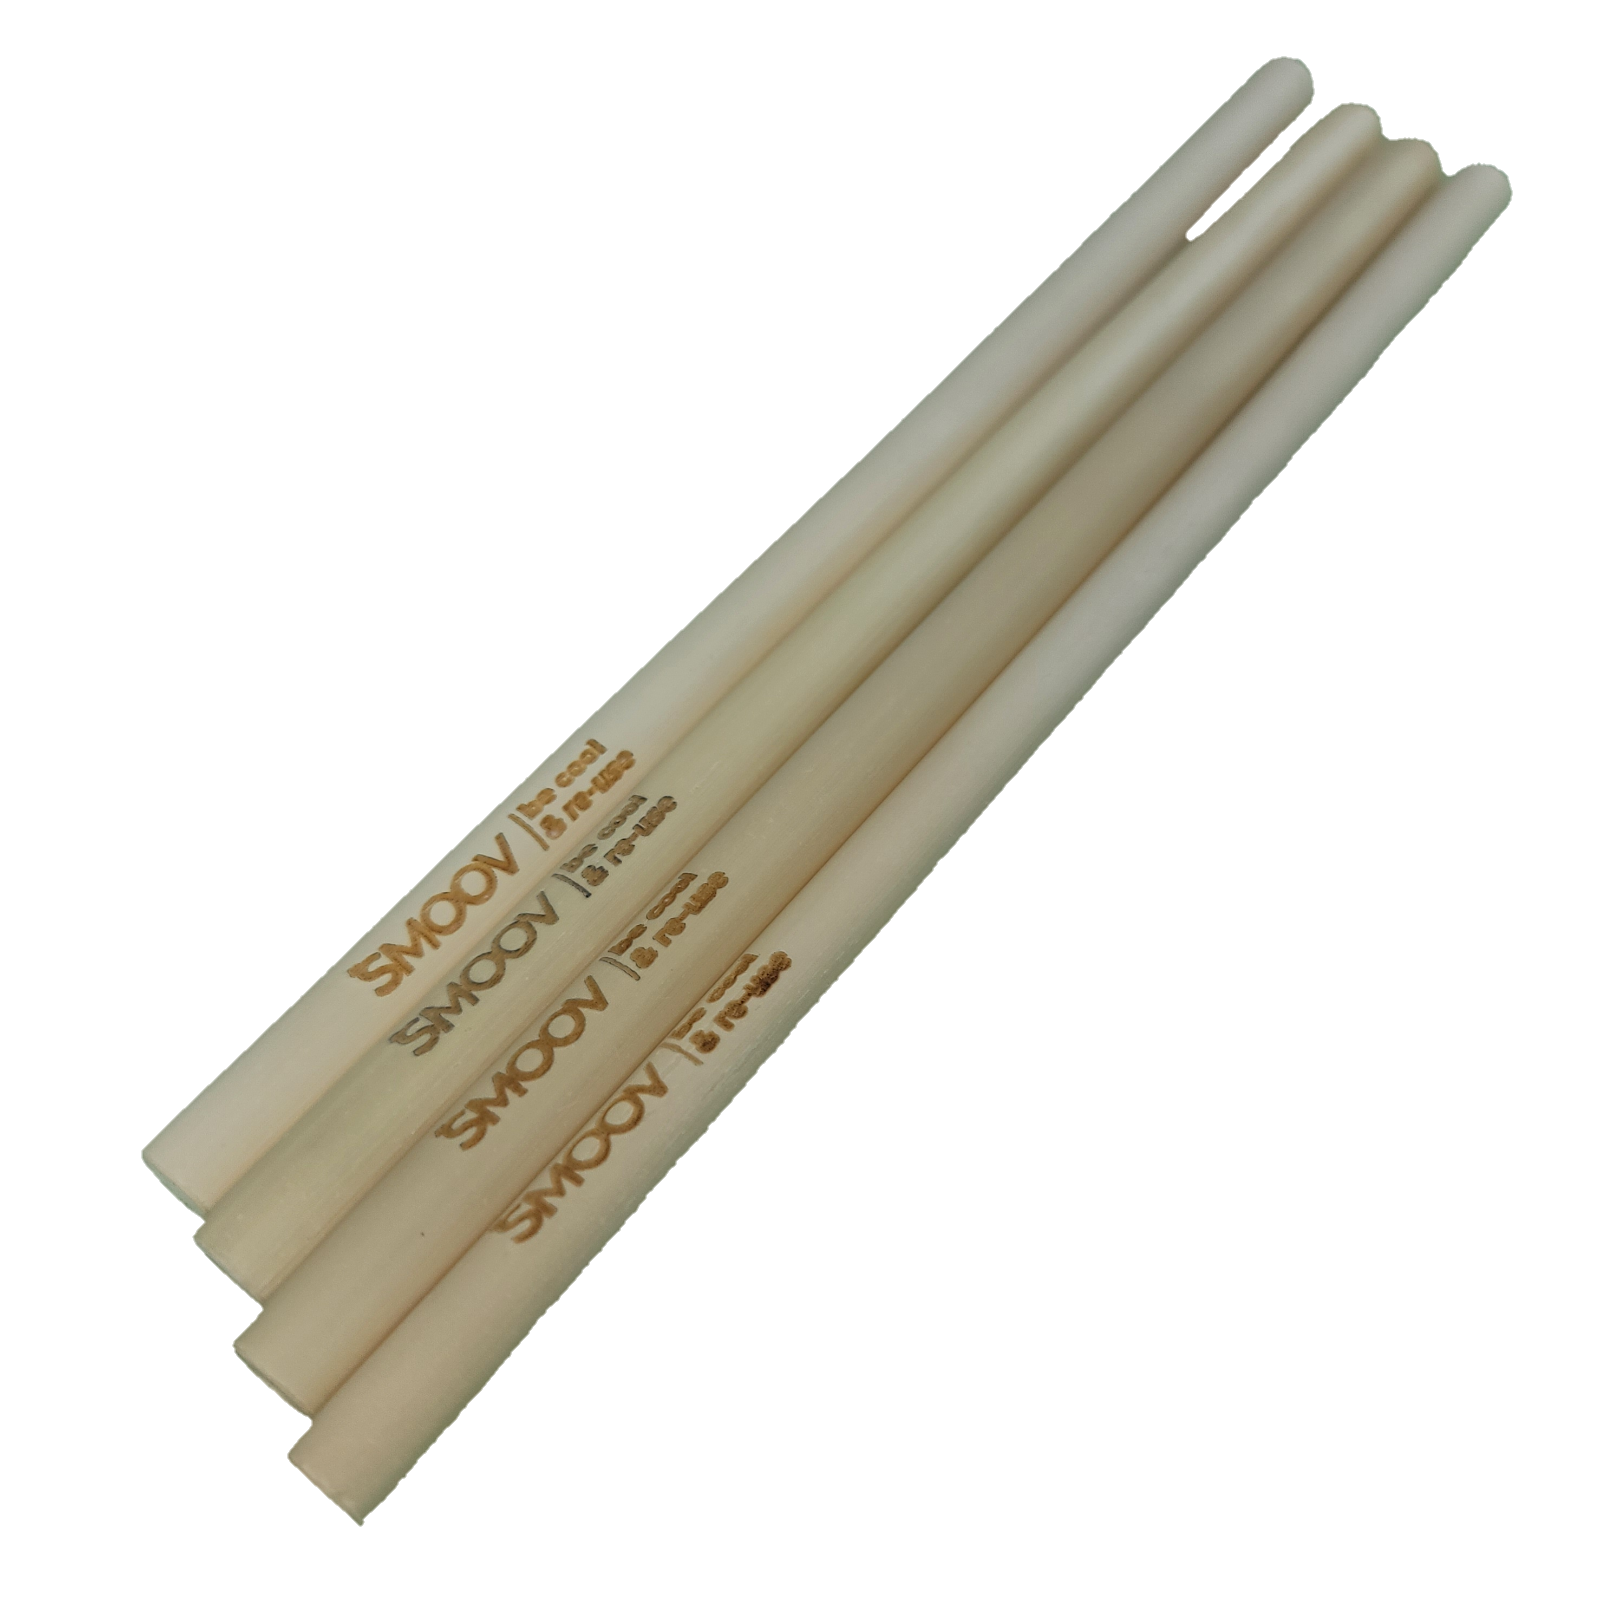 Kickstart your zero waste lifestyle with our eco friendly Bamboo Straws that'll make you feel like you're on a beach!